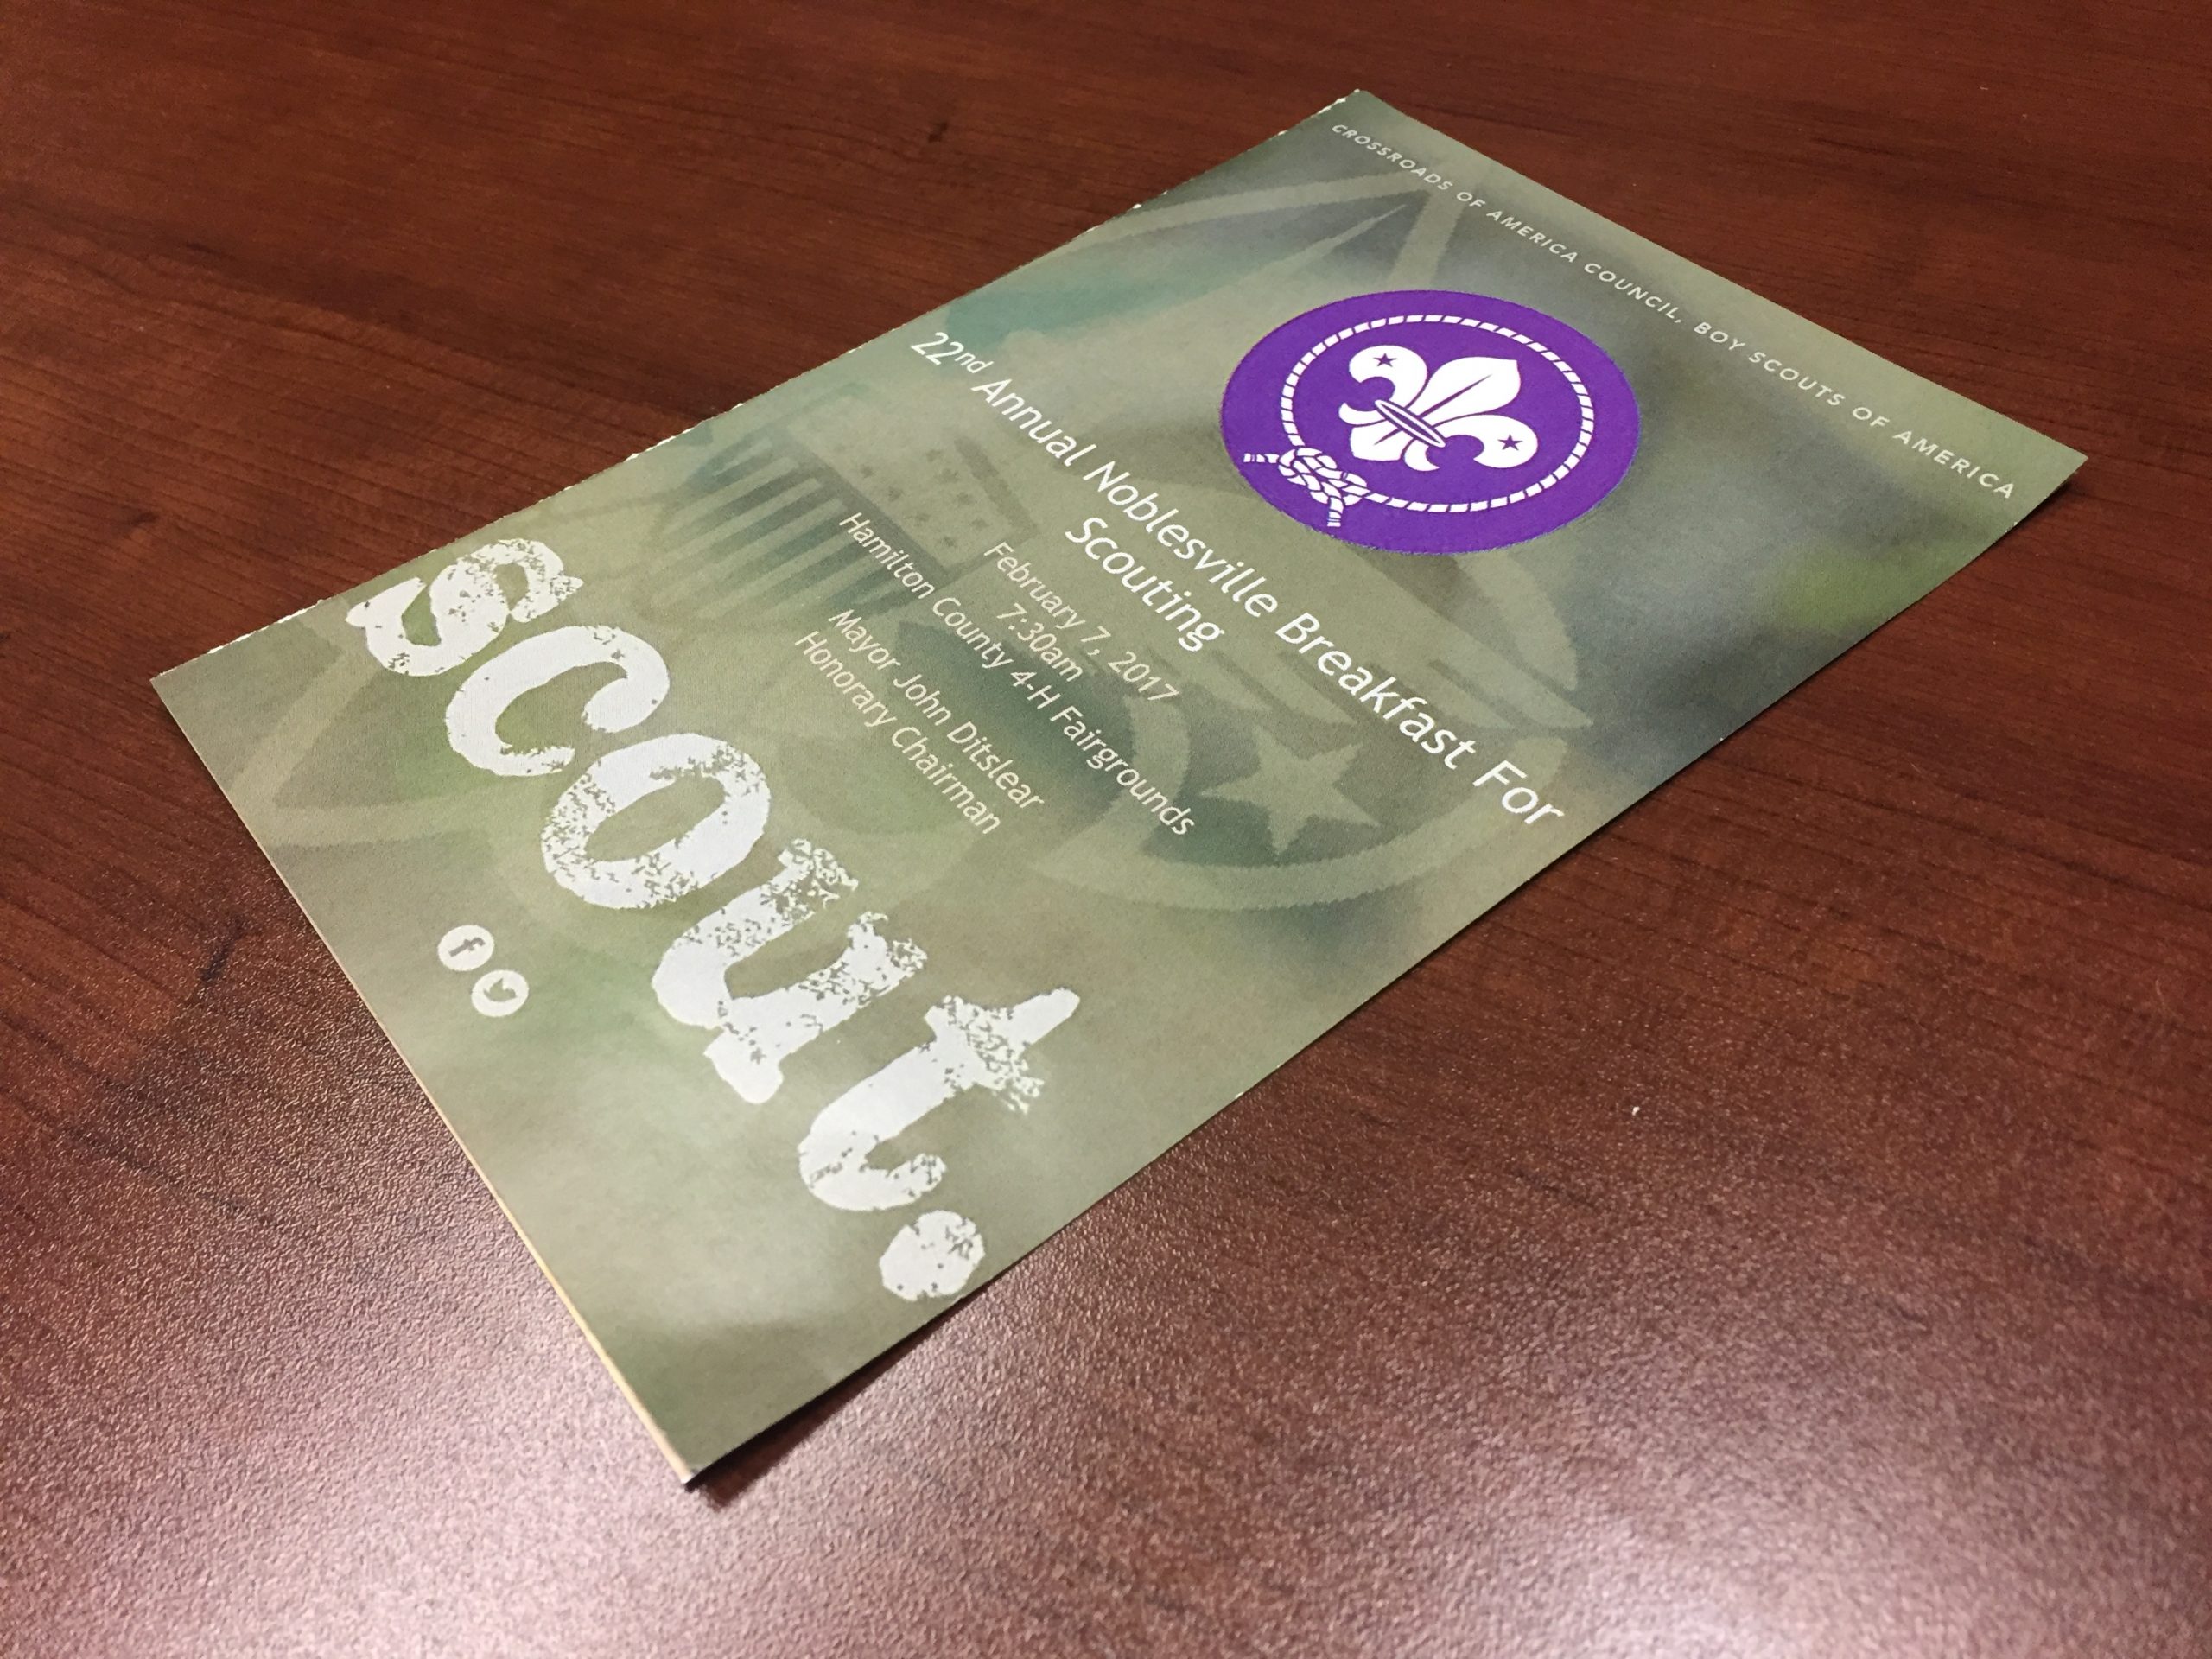 BlueSky Cares: 22nd Annual Breakfast for Scouting